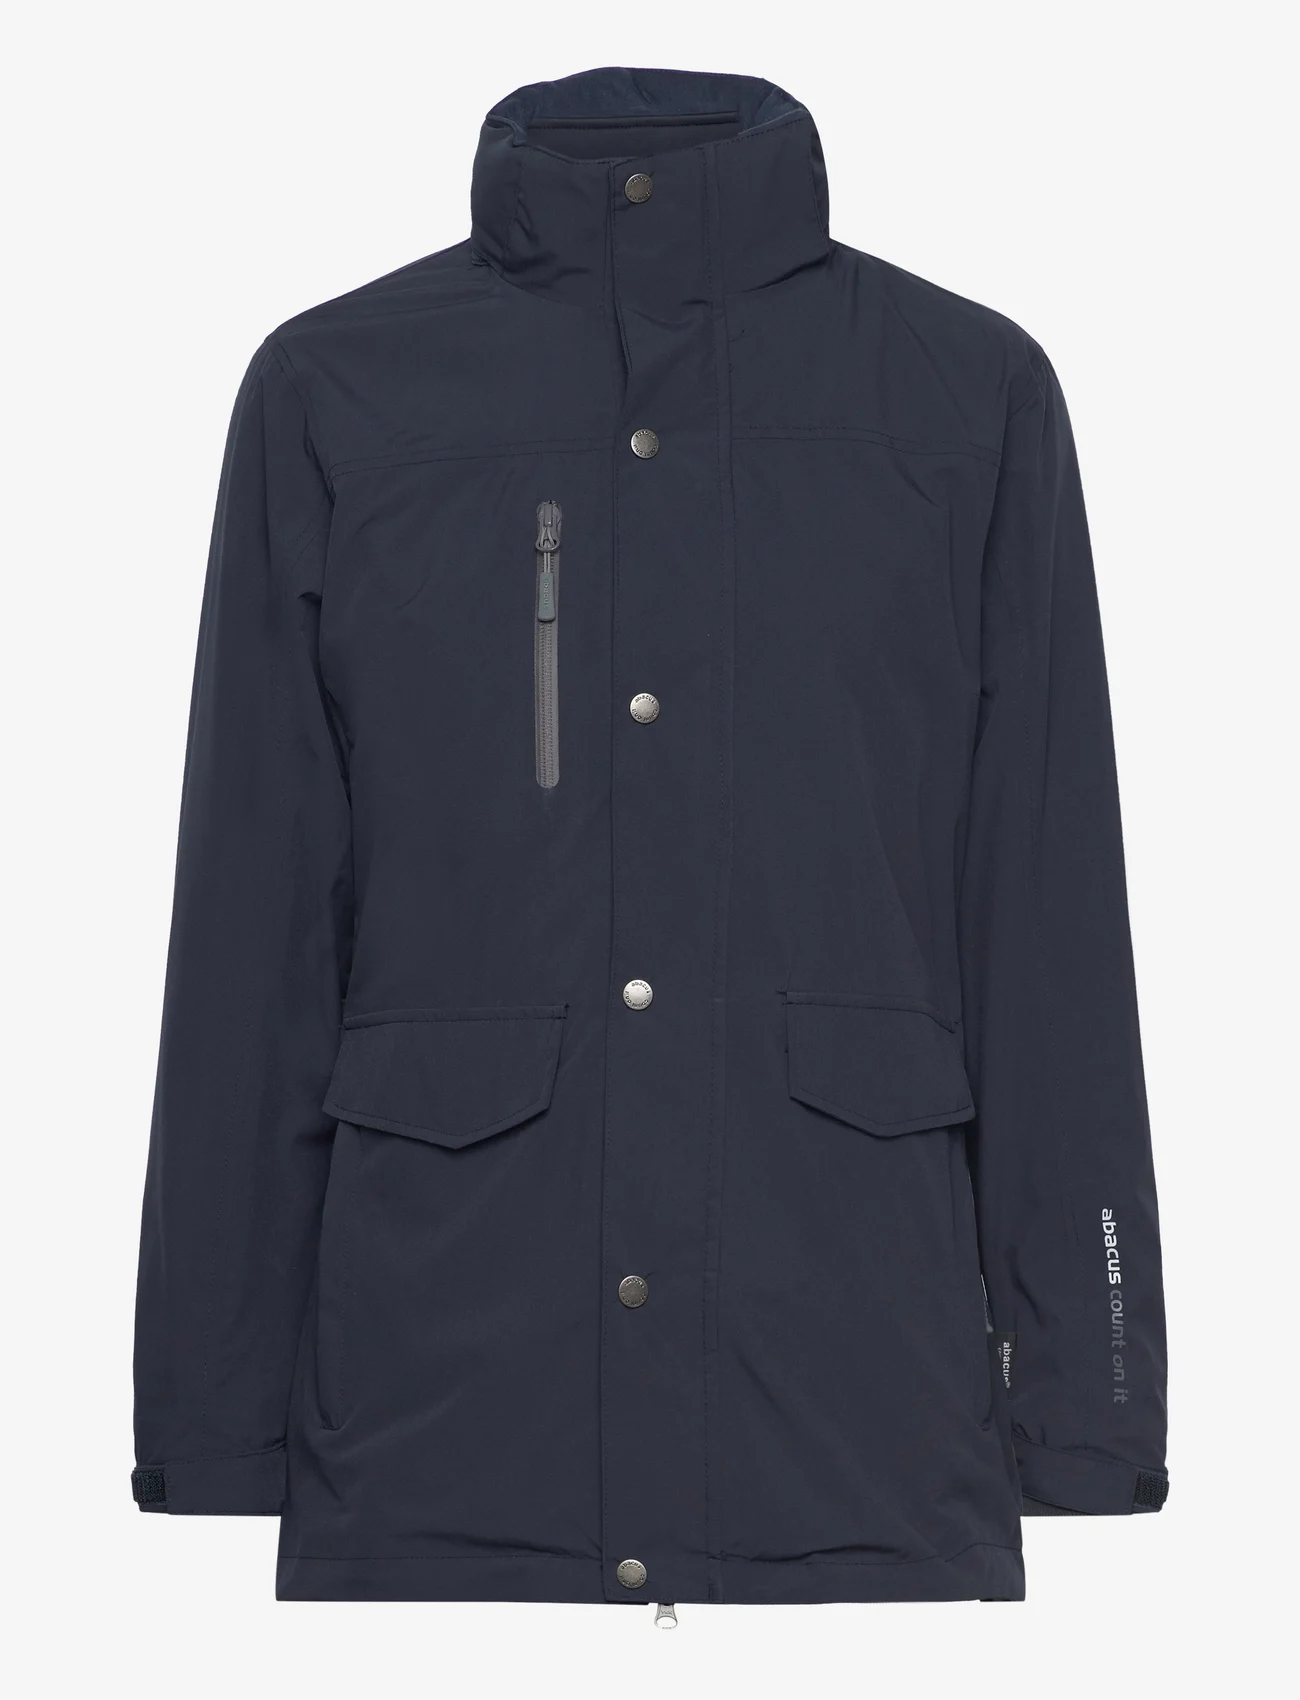 Abacus - Lds Staff 3 in1 jacket - parka coats - navy - 0